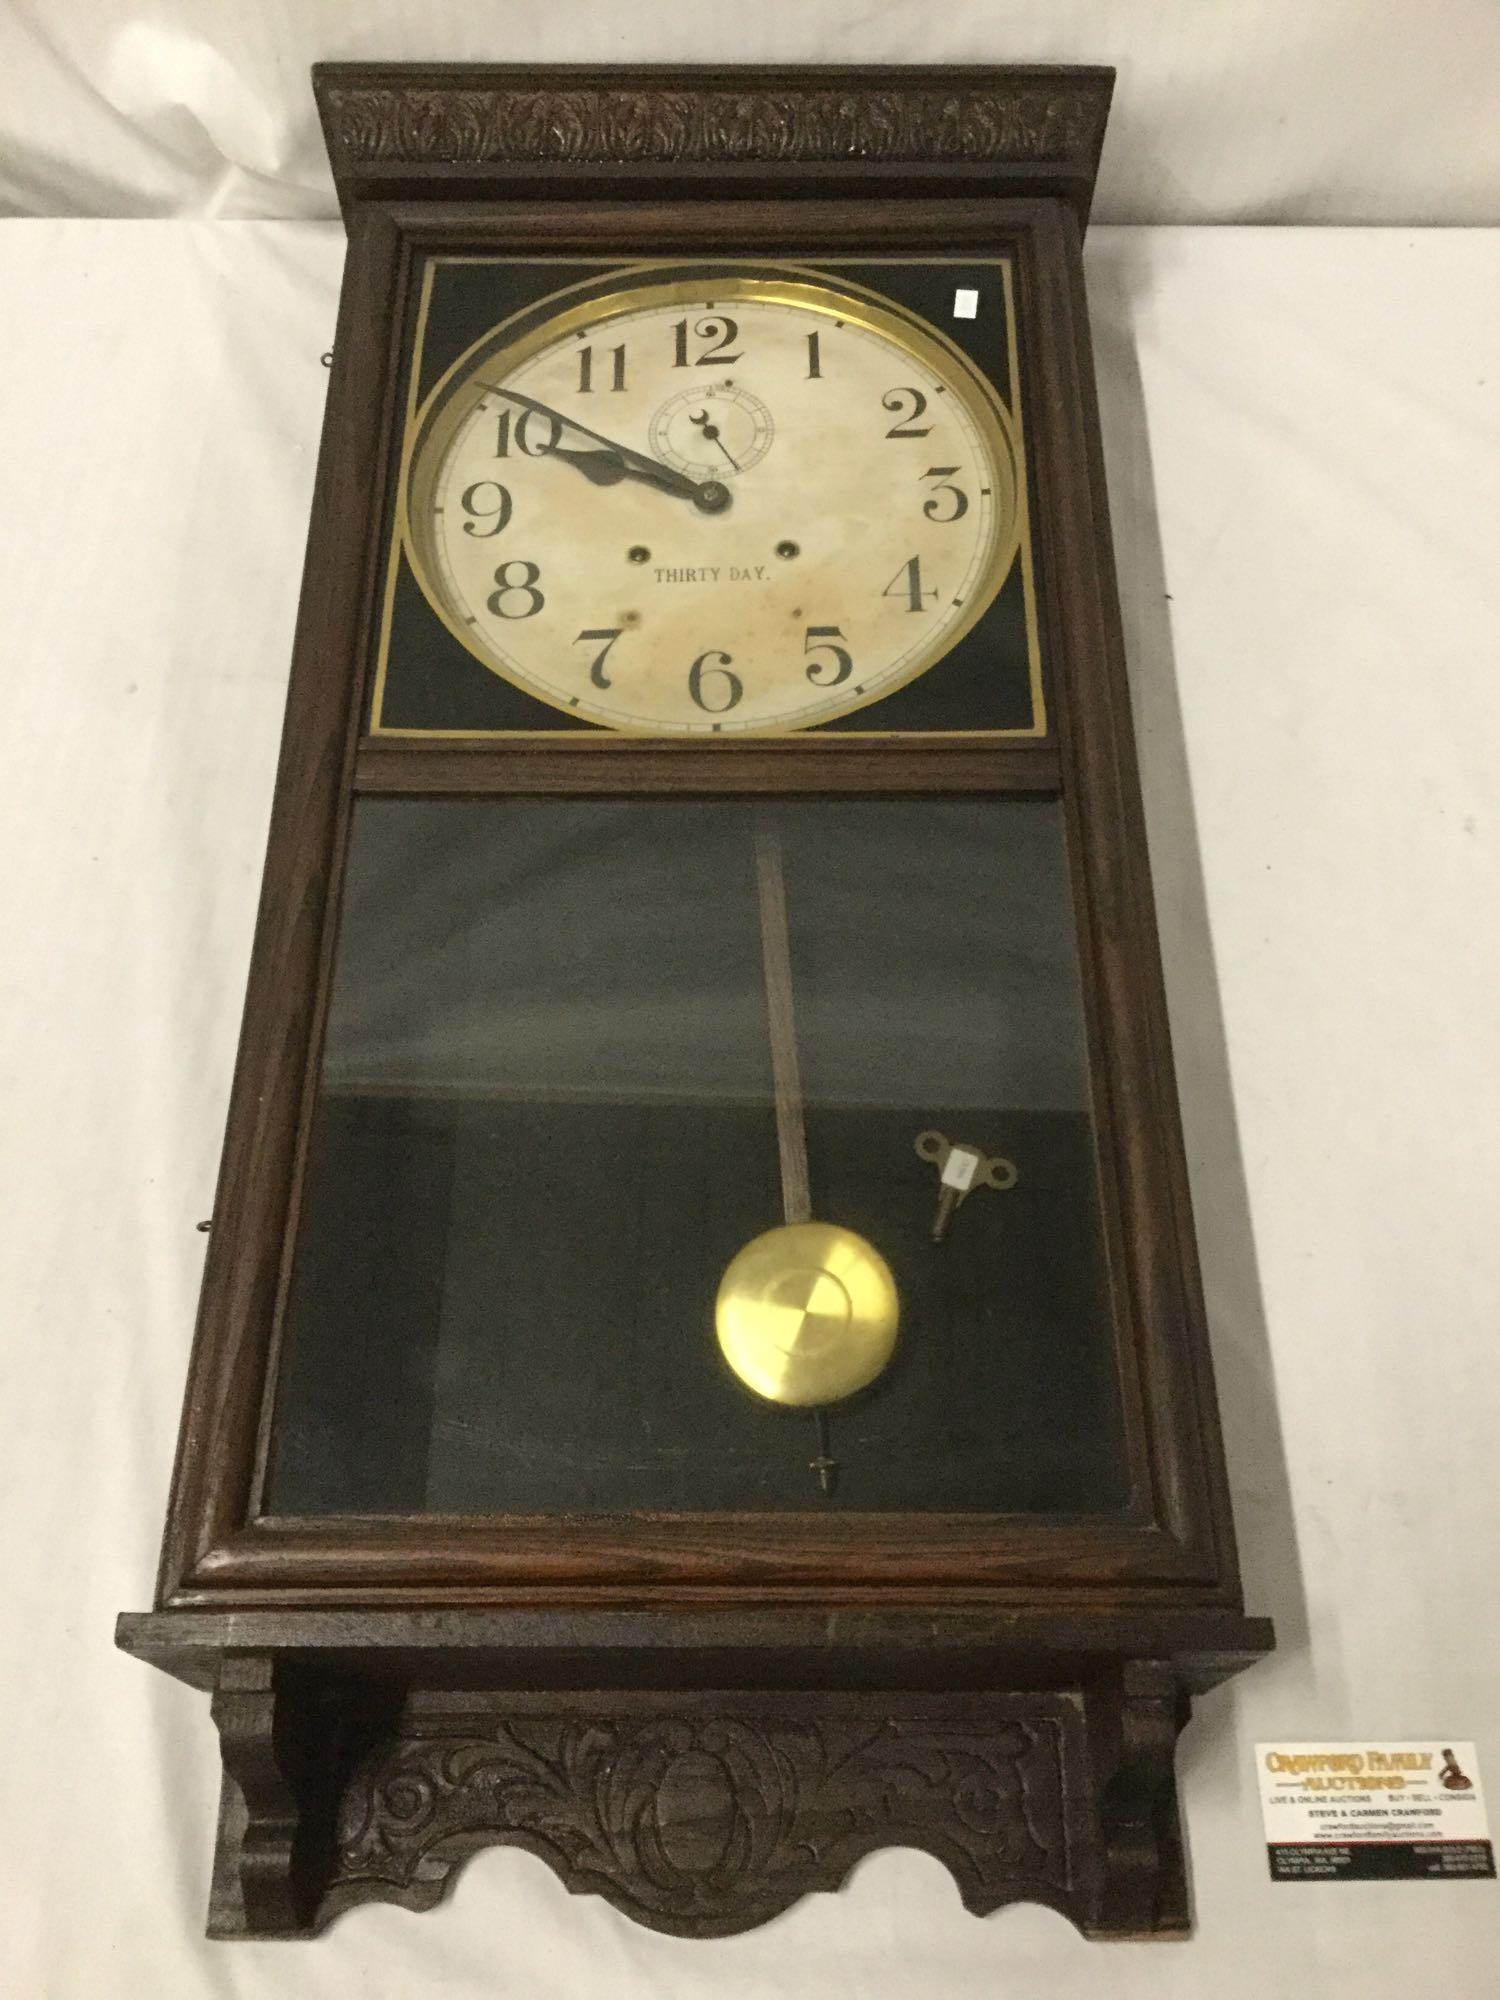 Antique Thirty Day wall clock by Waterbury Clock Co - shows some wear as is